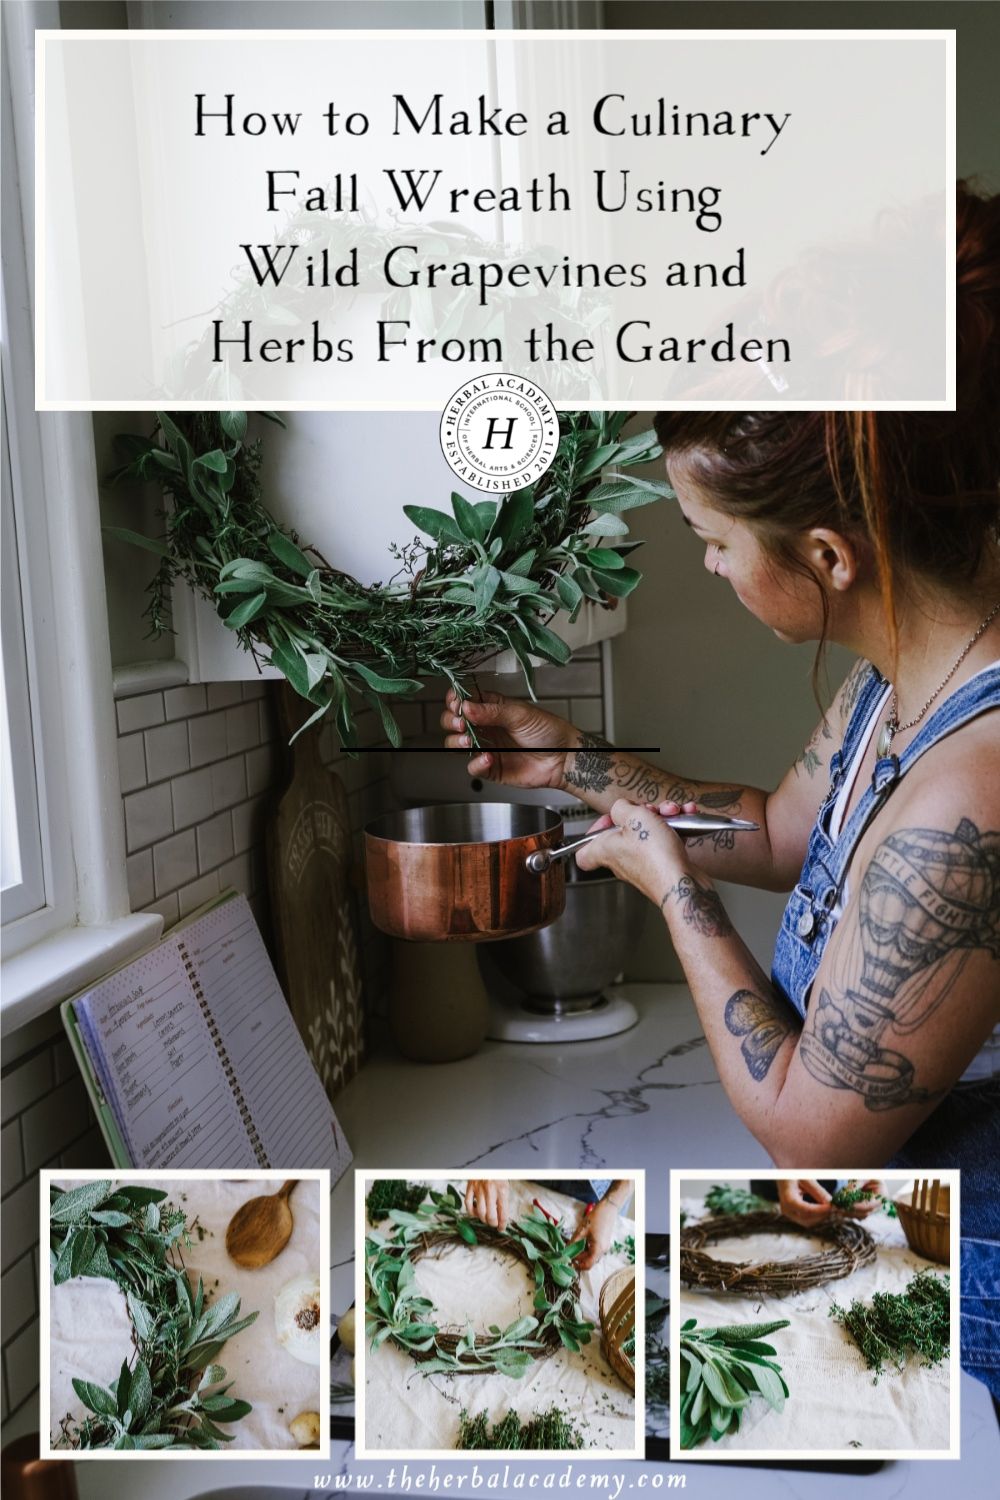 How to Make a Culinary Fall Wreath Using Wild Grapevines and Herbs From the Garden | Herbal Academy | Crafting a fall wreath is one way of drying garden herbs that is both aesthetically pleasing as well as useful to have in the kitchen.